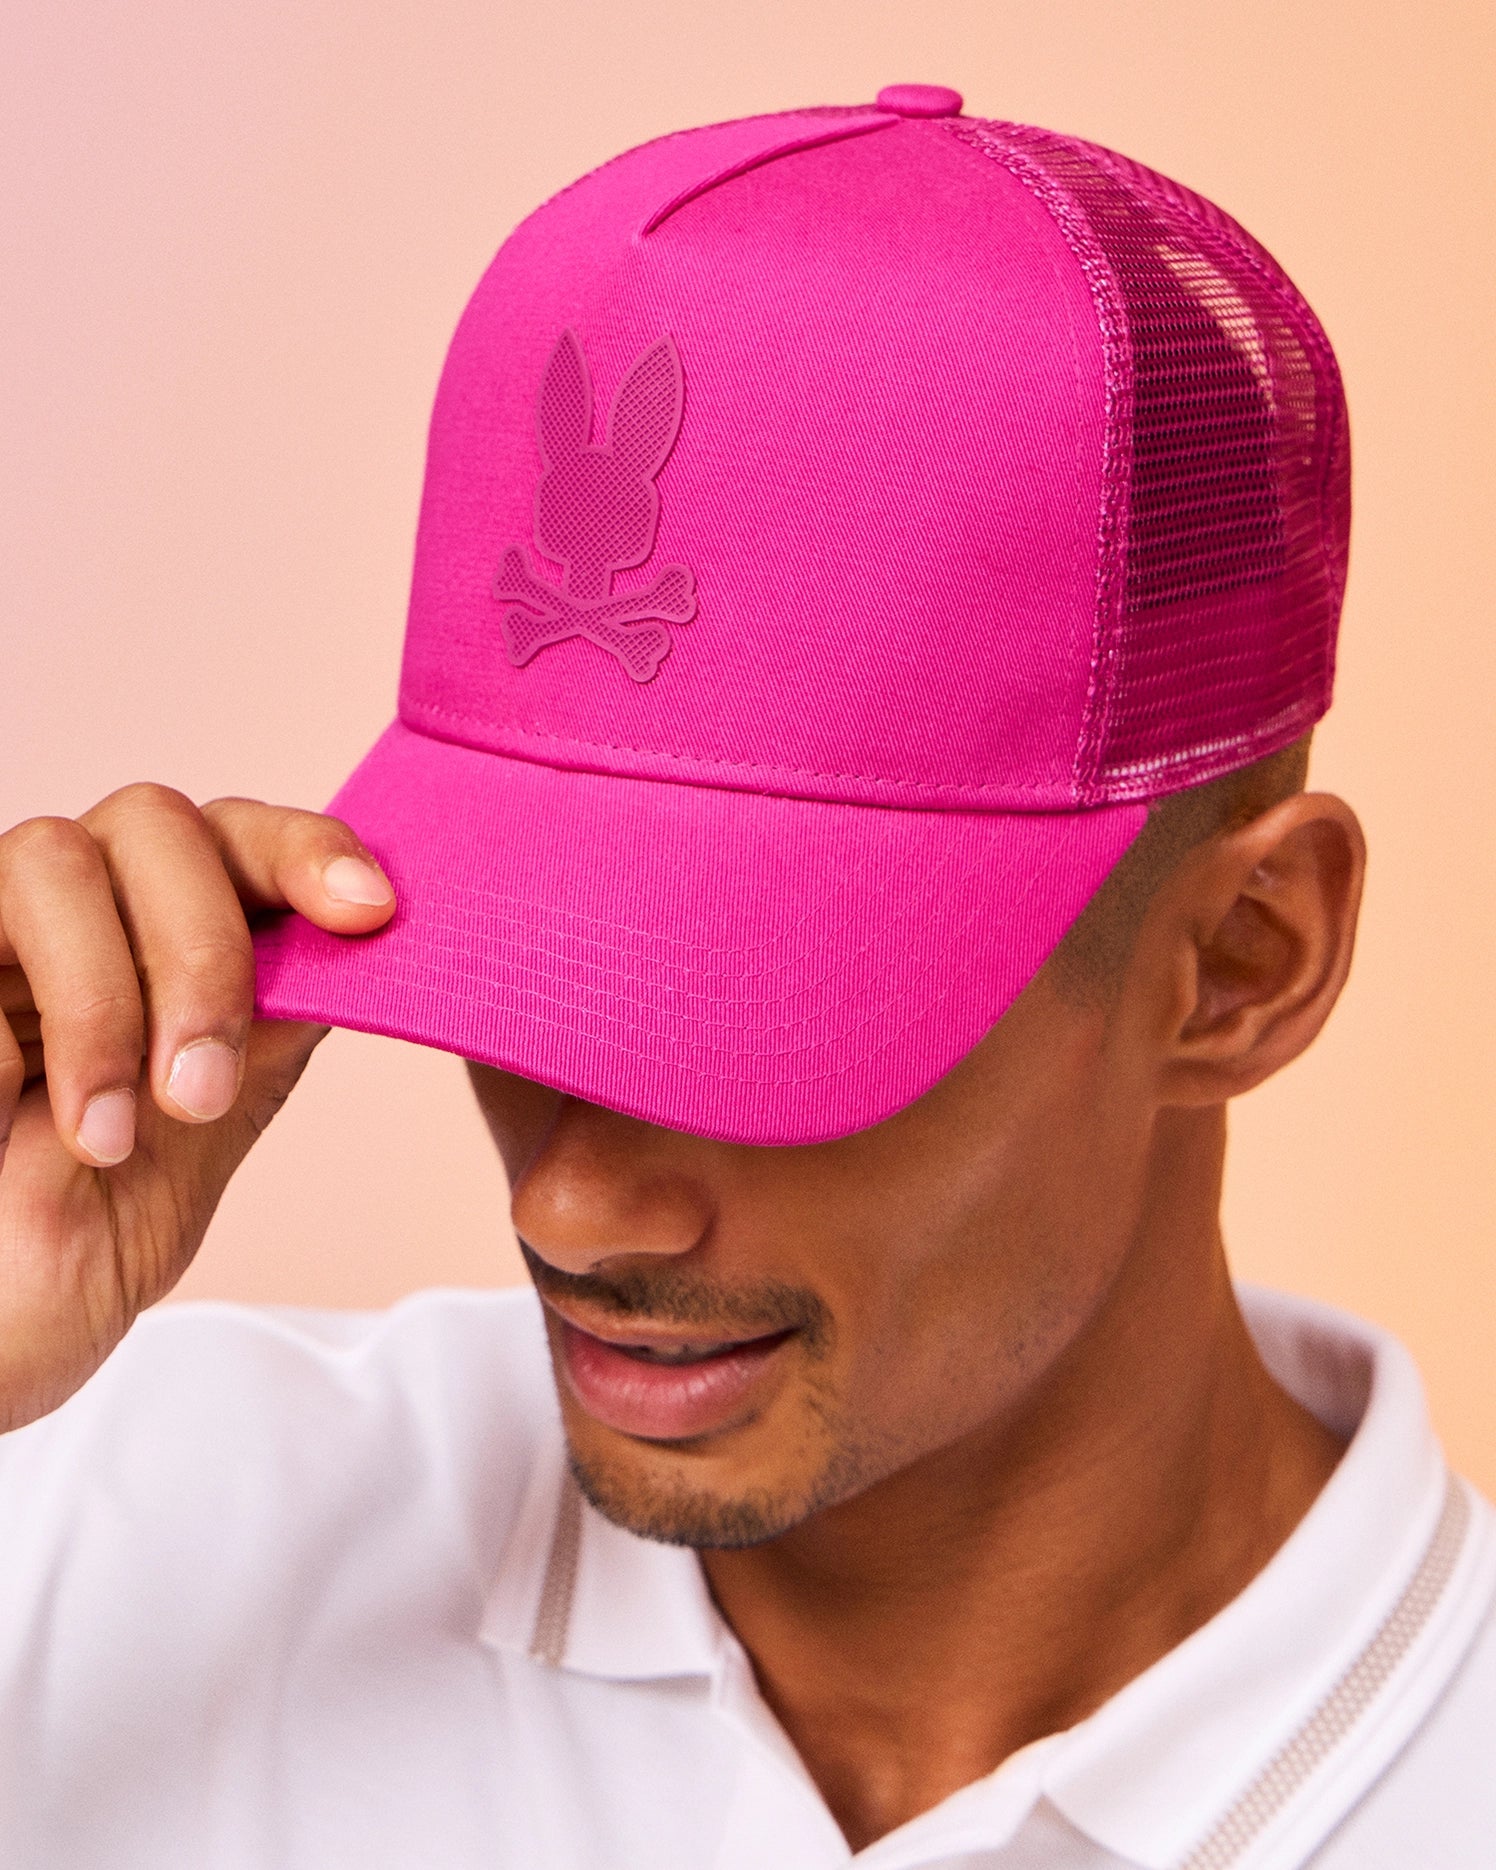 A person wearing a white polo shirt tilts the brim of a bright pink baseball cap adorned with a bunny head and crossbones logo. The Mens Riviera Trucker Cap - B6A667C200 by Psycho Bunny, with its iconic snapback fastening, evokes early 2000s nostalgia against a soft gradient of pinks and peaches.